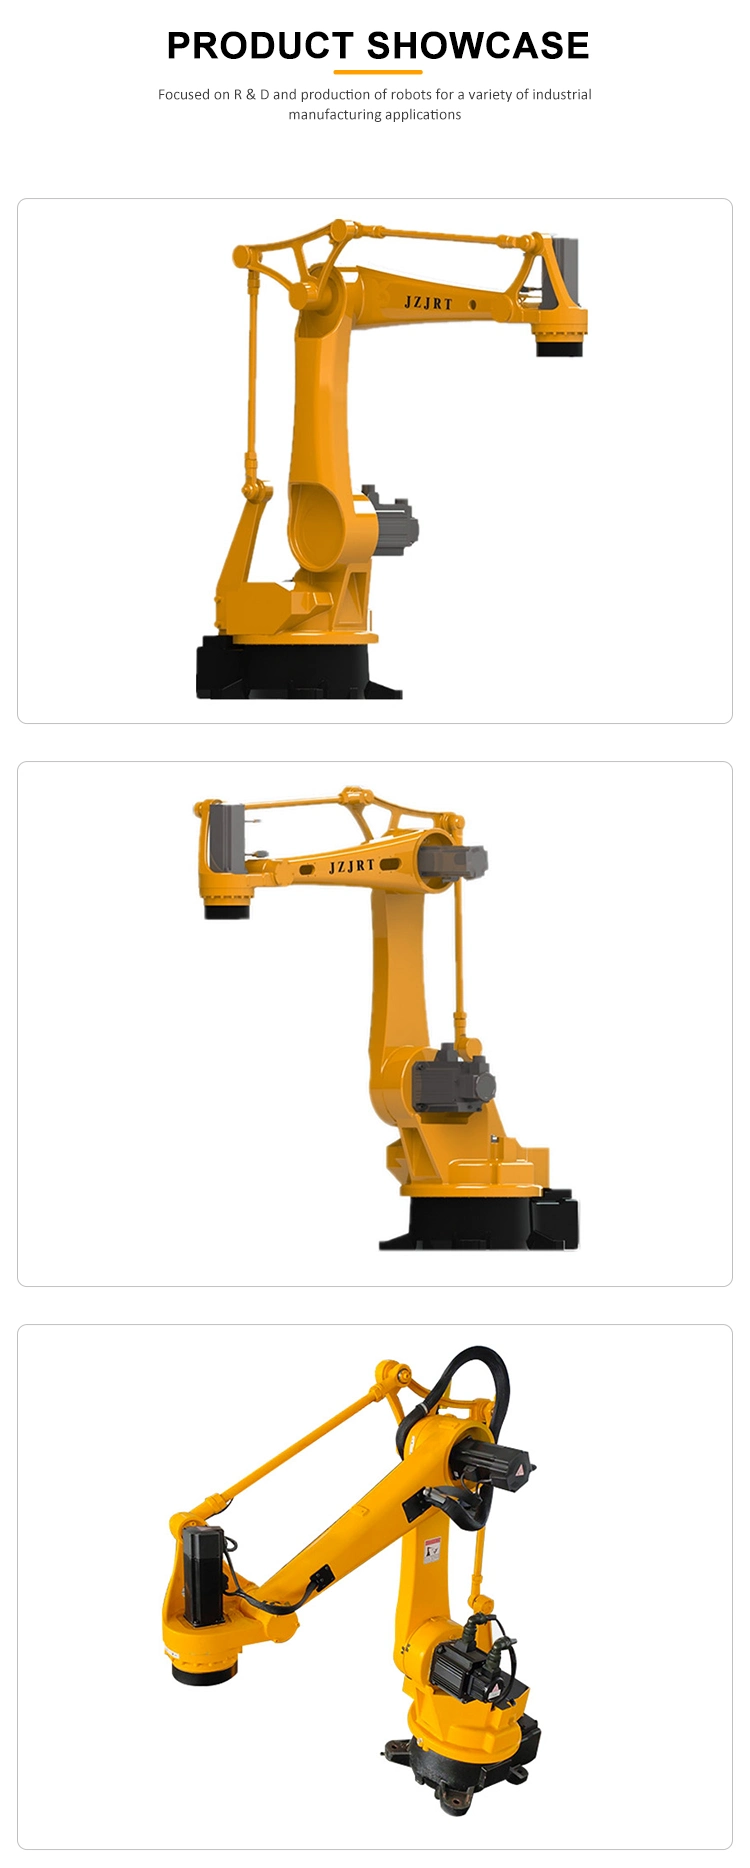 Professional 4 Dof Manipulator Arm Industrial Robot for Stamping Application